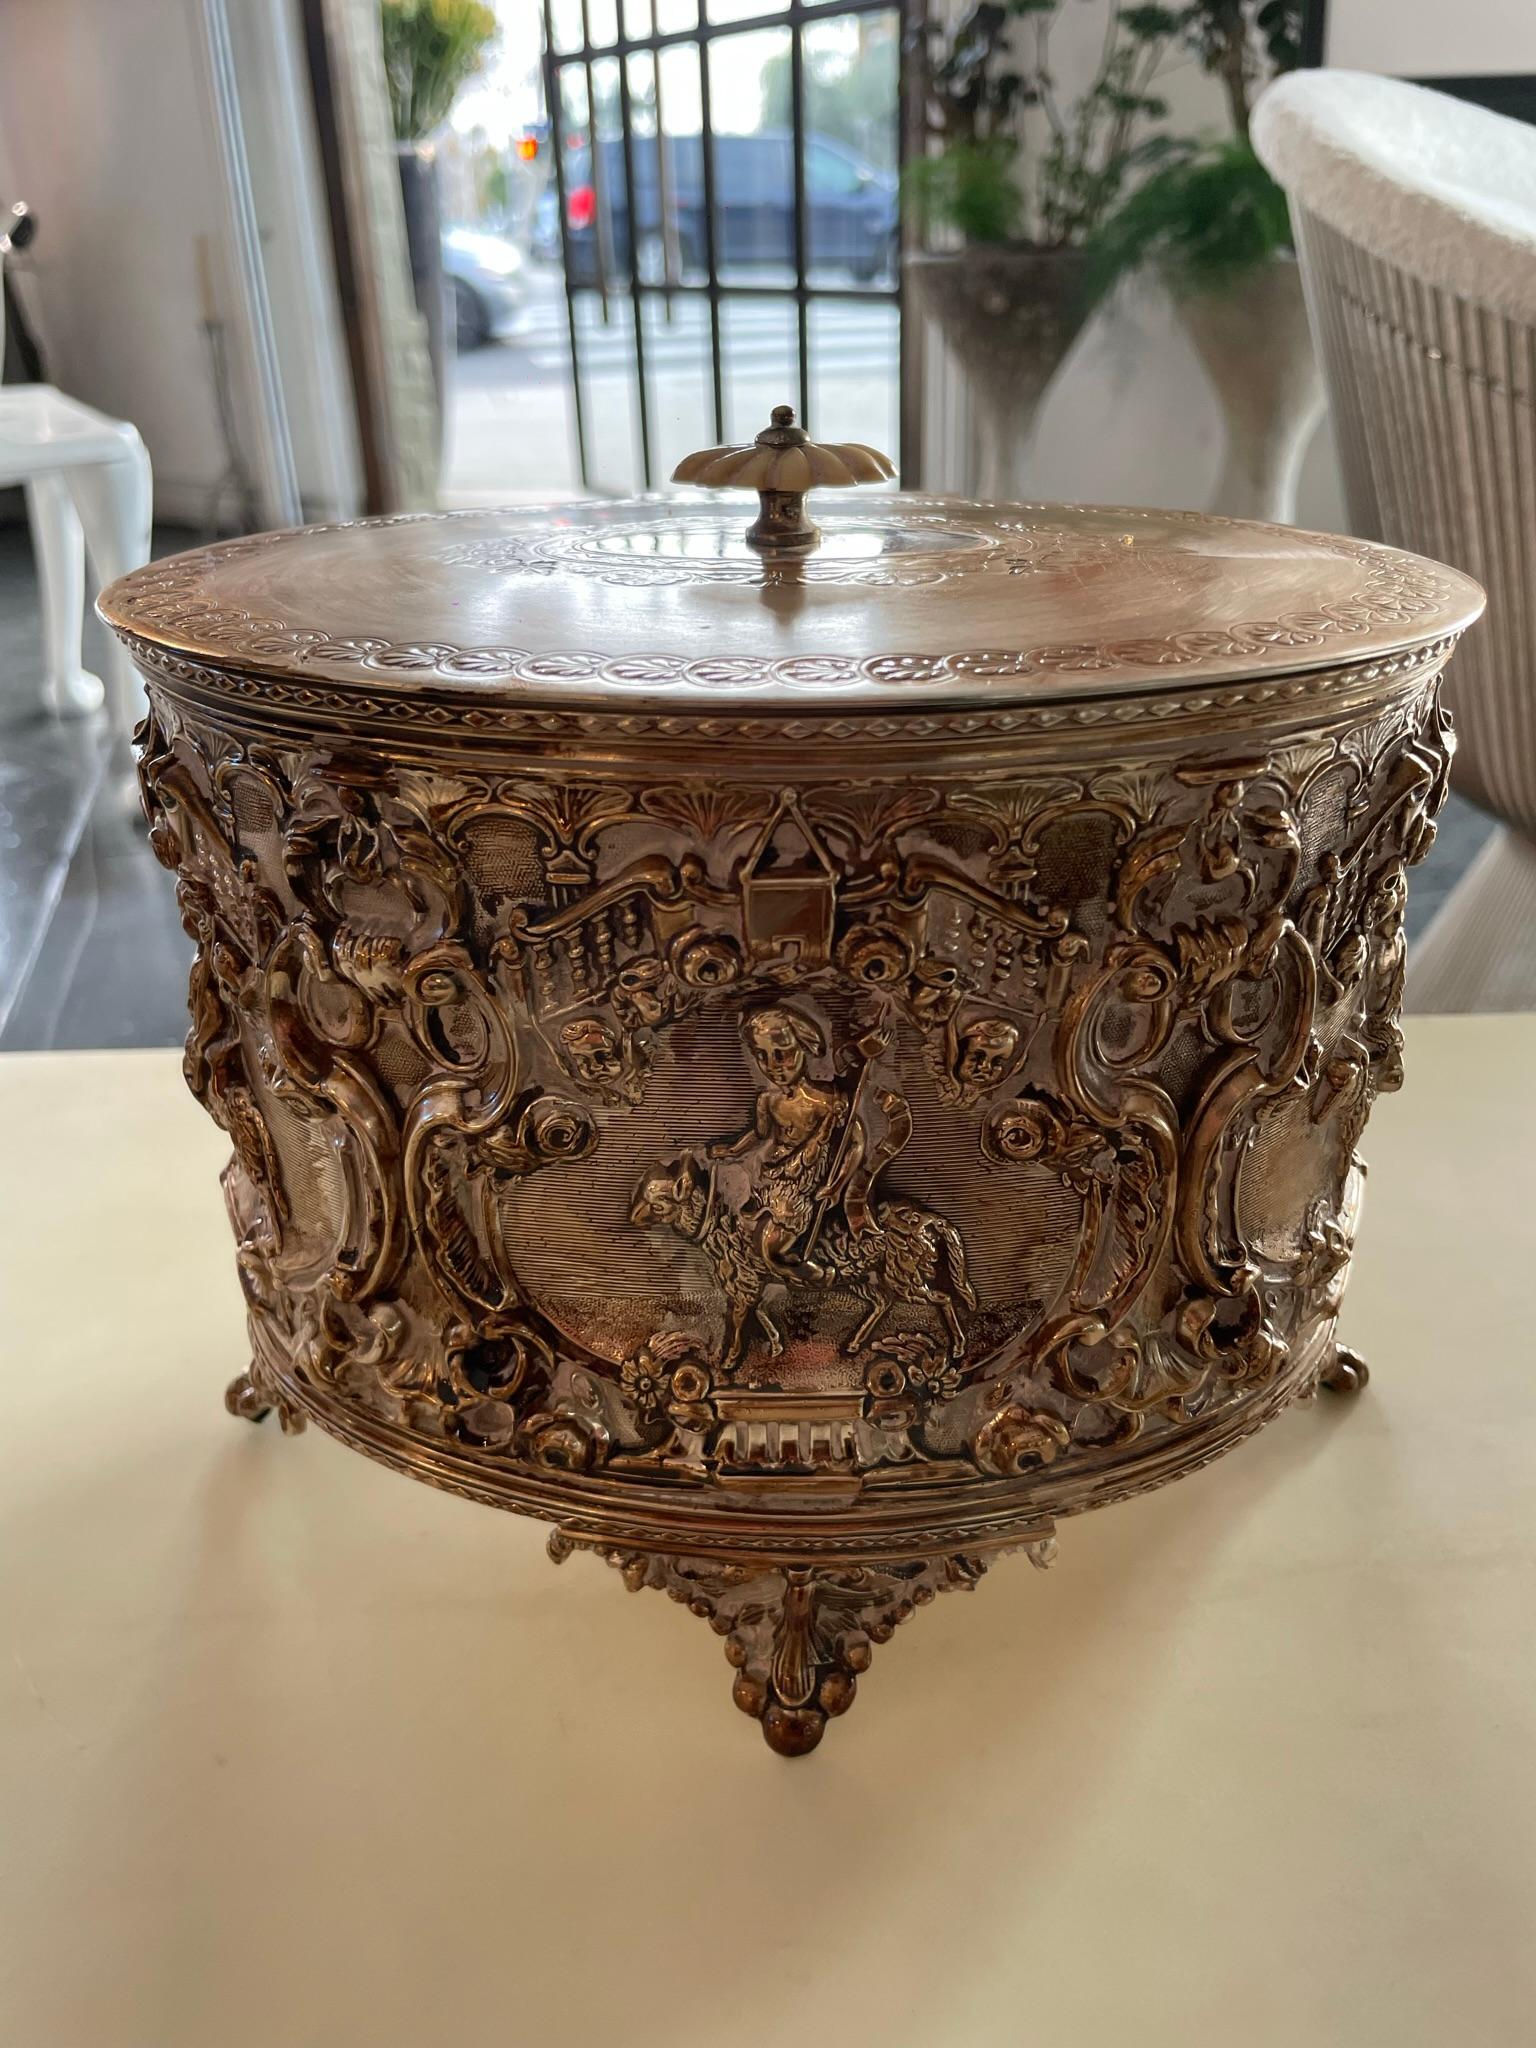 Silver-plated Biscuit Box 
oval, the hinged lid with bone finial, the body relief-cast with cherubs riding animals within scroll borders, on four feet; marked to underside 